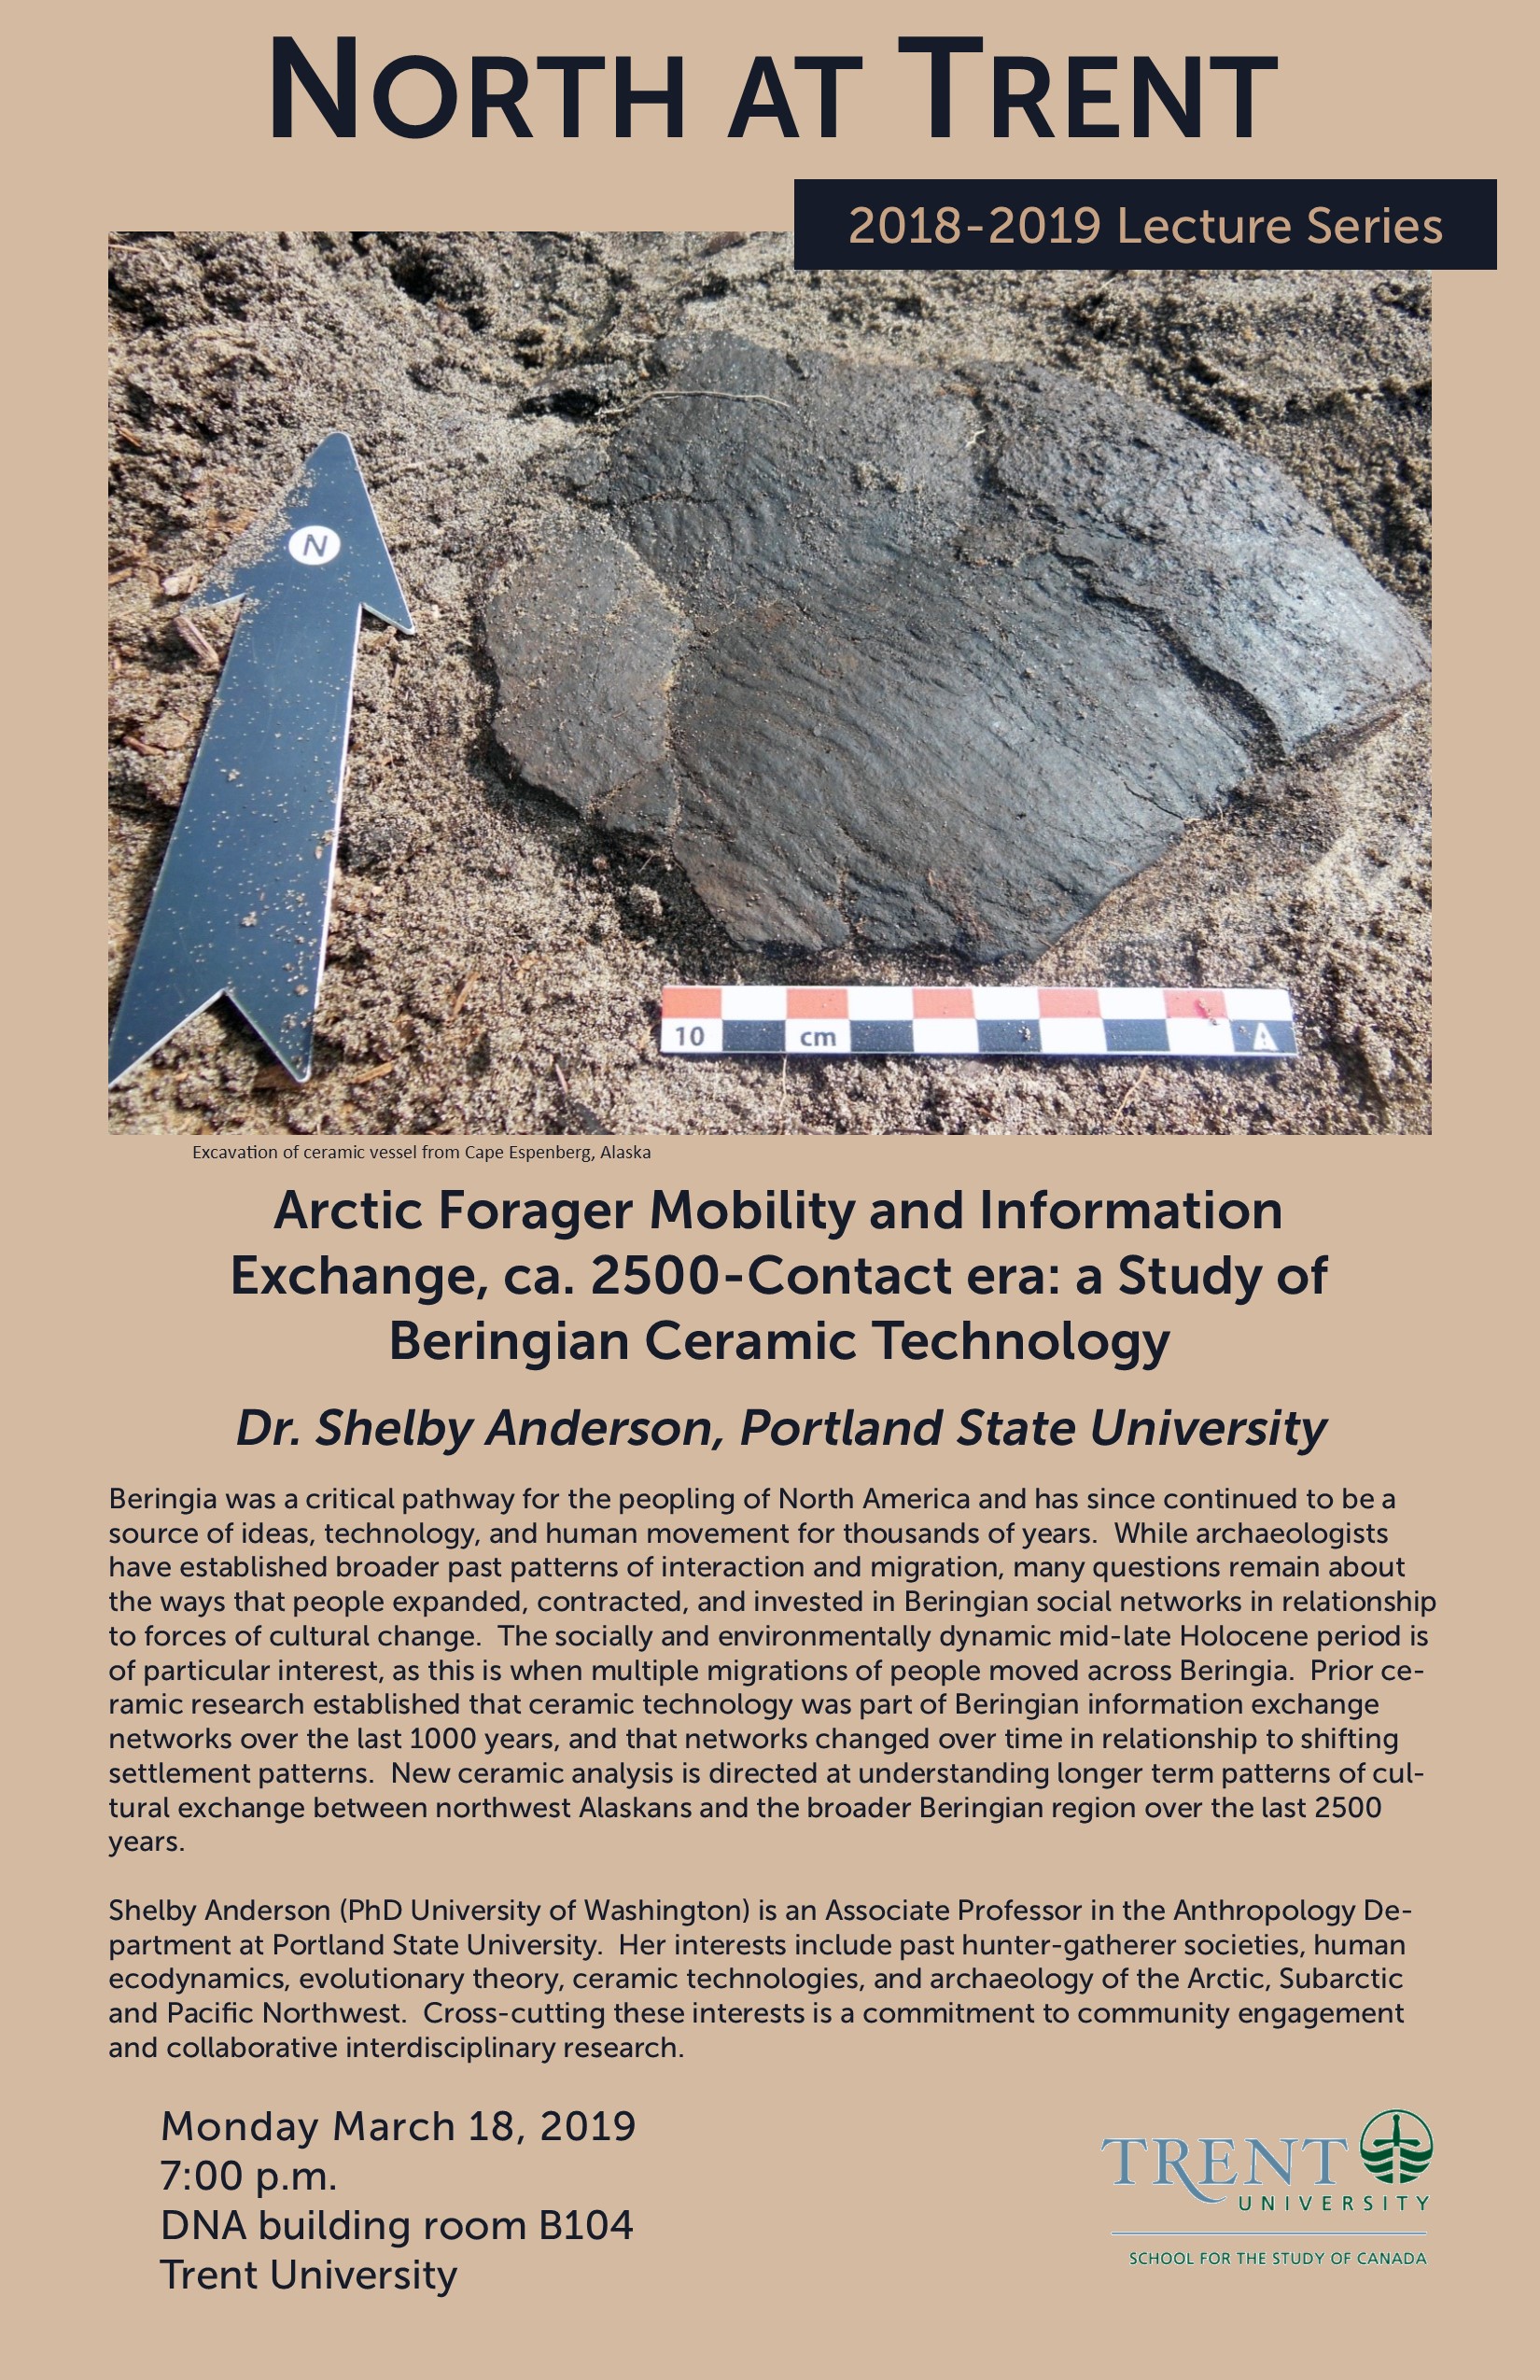 "Arctic Forager Mobility and Information Exchange, ca. 2500 - Contact Era: A Study of Beringian Ceramic Technology with Shelby Anderson March 2019